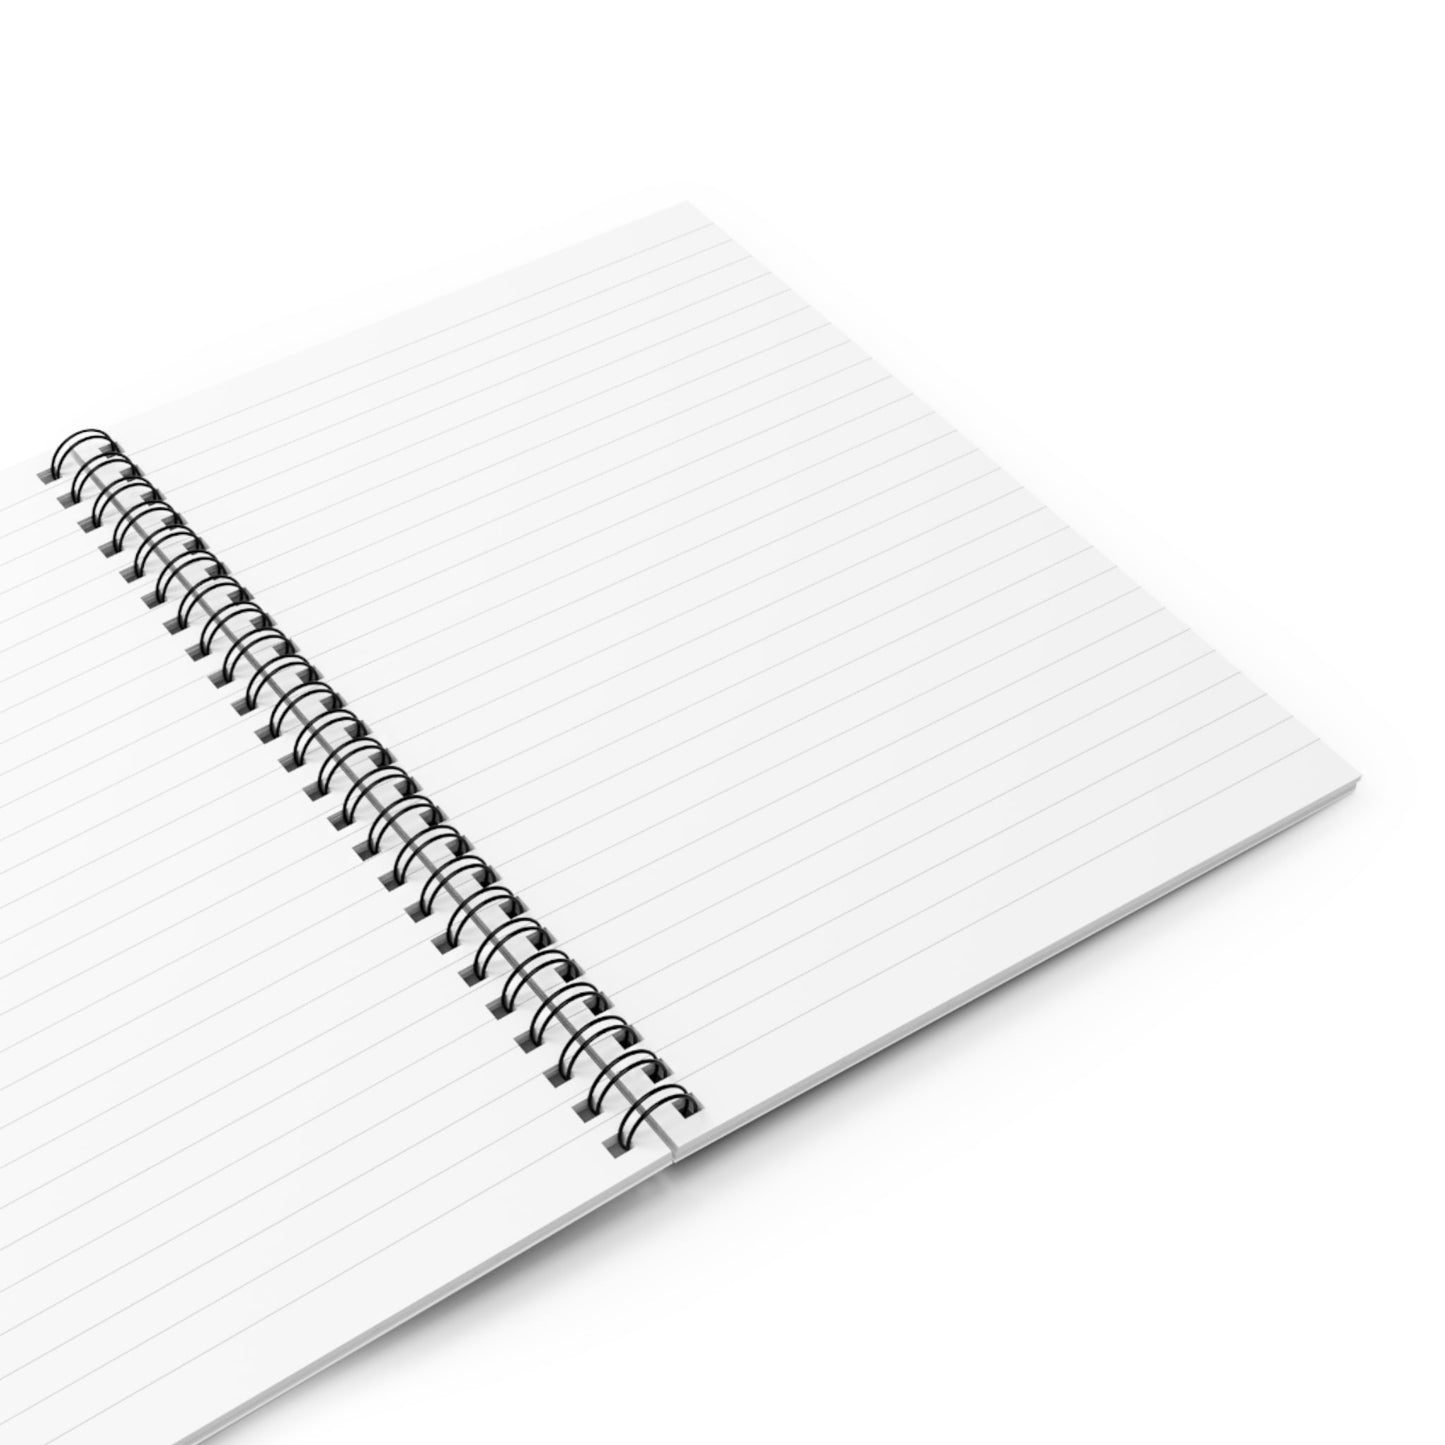 Spiral Notebook with Minimalist Landscape Cover Opened with Blank White College Ruled Pages